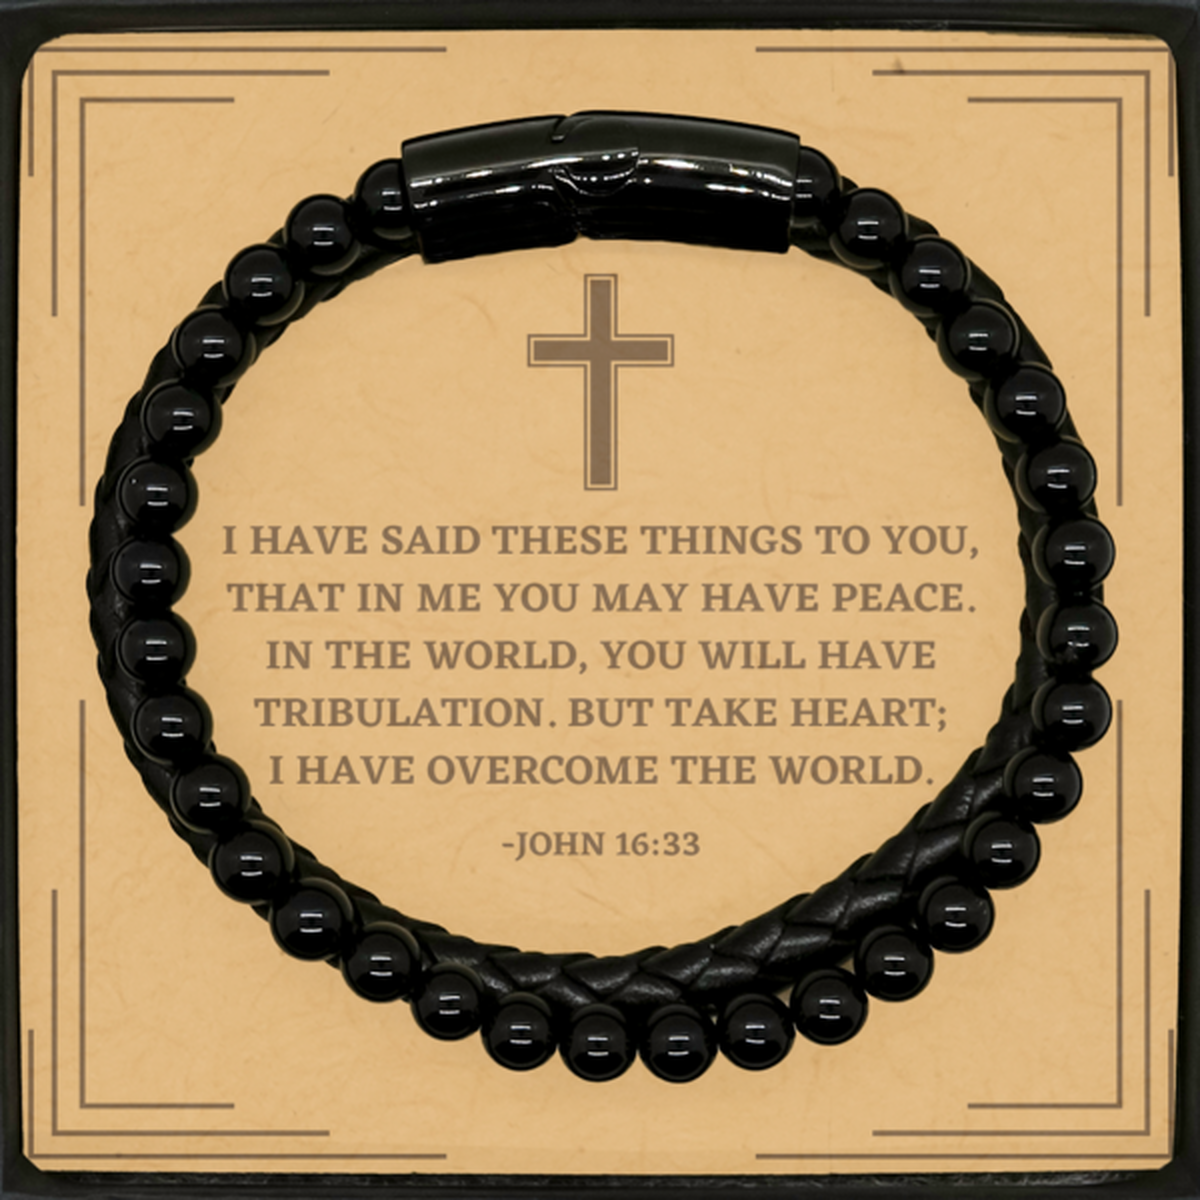 Baptism Gifts For Teenage Boys Girls, Christian Bible Verse Stone Leather Bracelet, I have said these things, Confirmation Gifts, Bible Verse Card for Son, Godson, Grandson